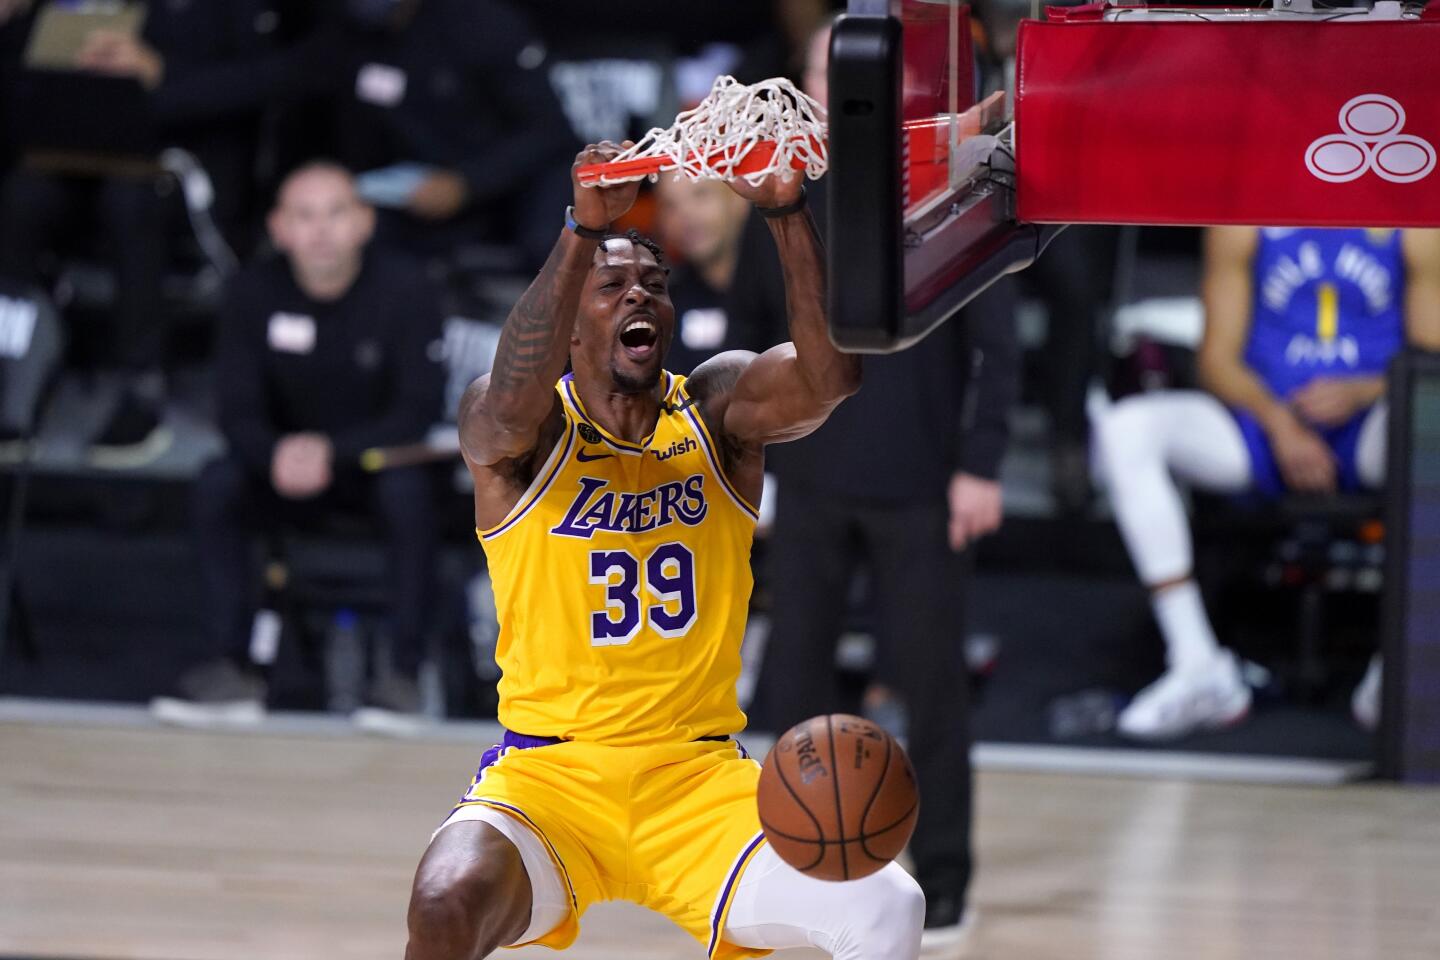 Lakers center Dwight Howard puts down a dunk off an alley-oop pass from Rajon Rondo (not pictured).